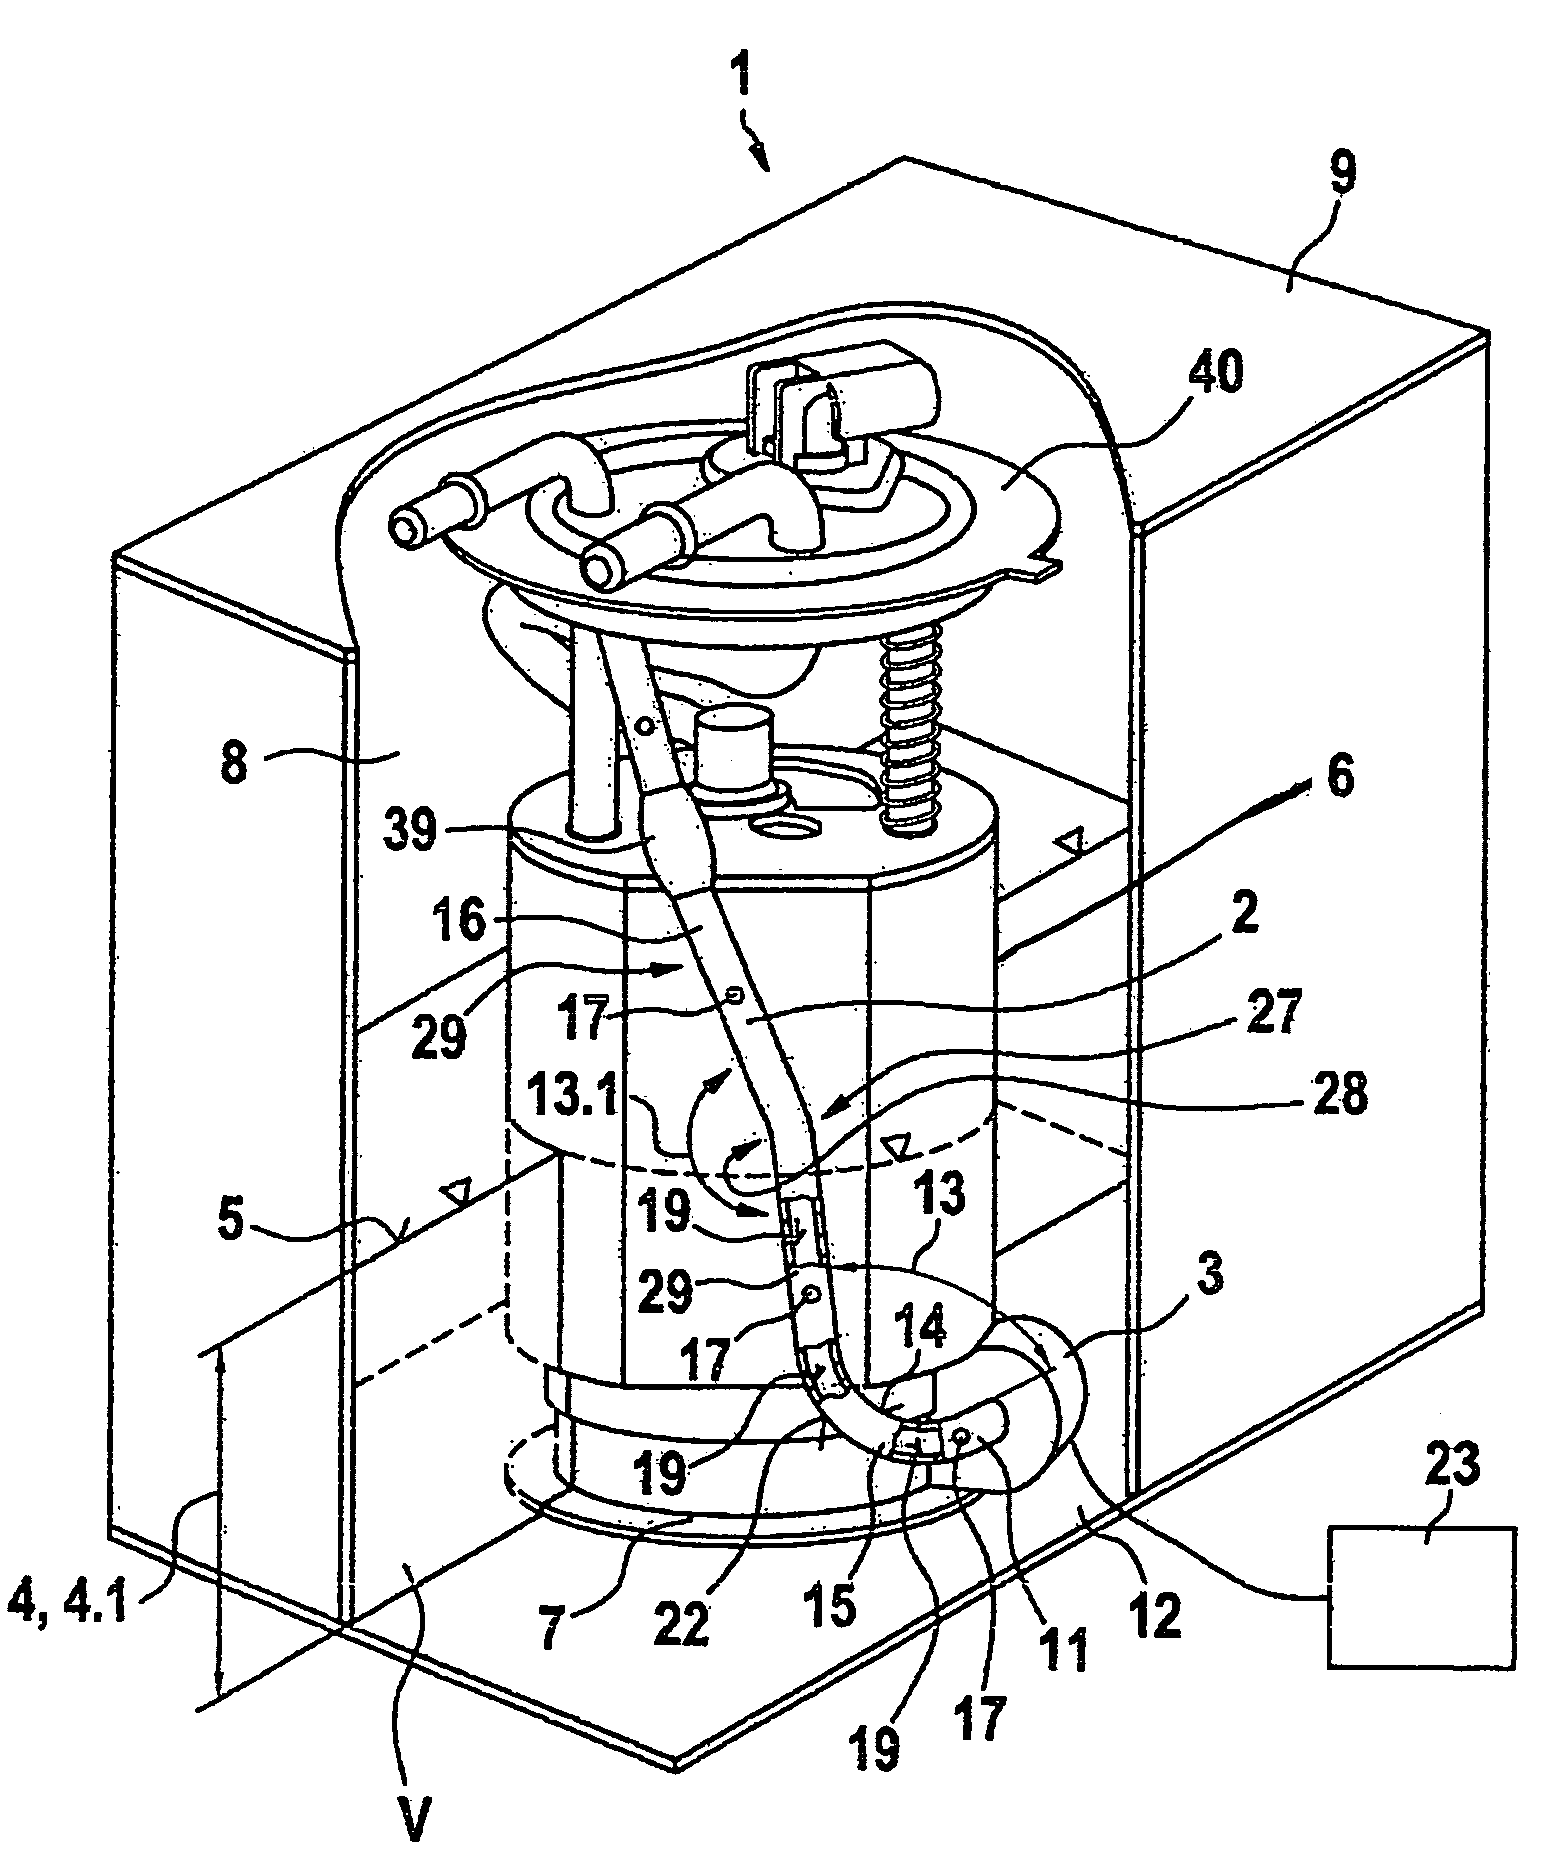 Device for measuring the level of a fluid in a fuel tank of a motor vehicle